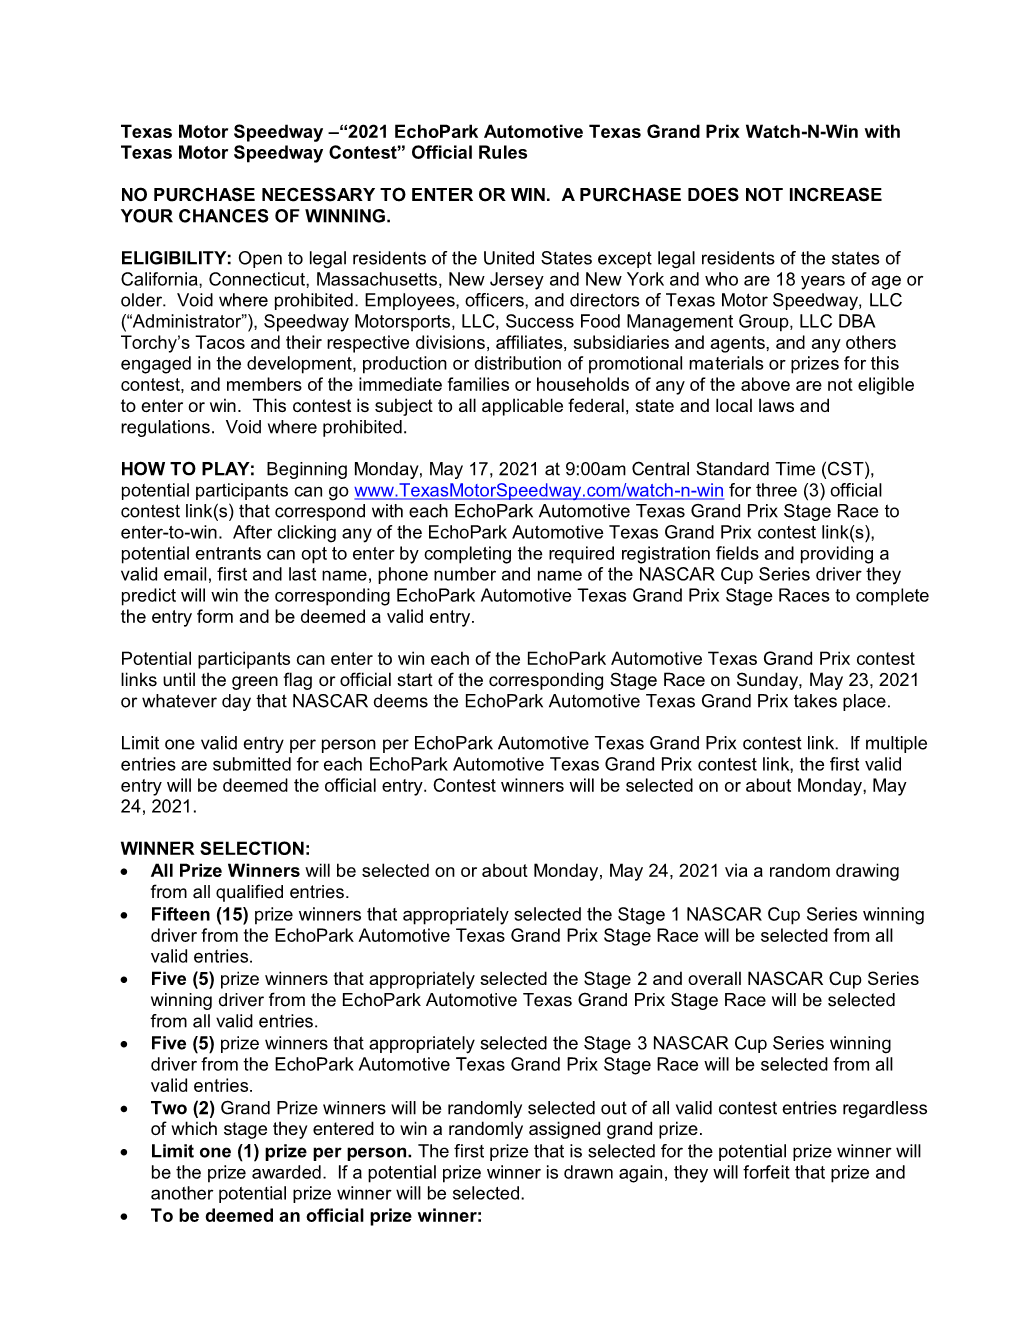 “2021 Echopark Automotive Texas Grand Prix Watch-N-Win with Texas Motor Speedway Contest” Official Rules